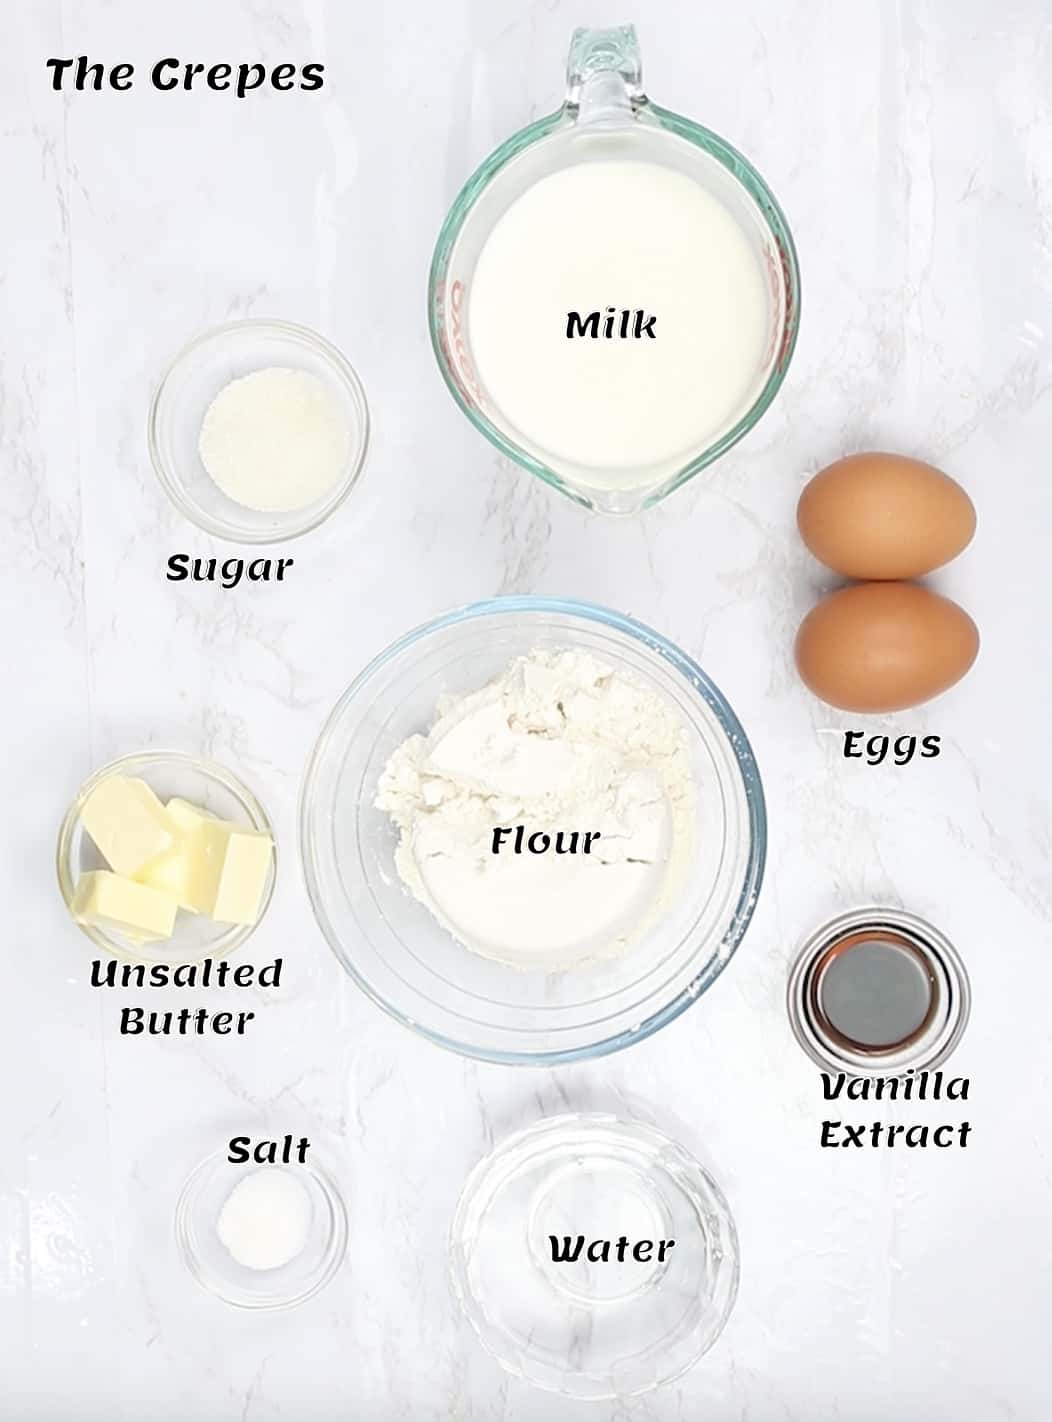 Crepe recipe ingredients for crepes suzette